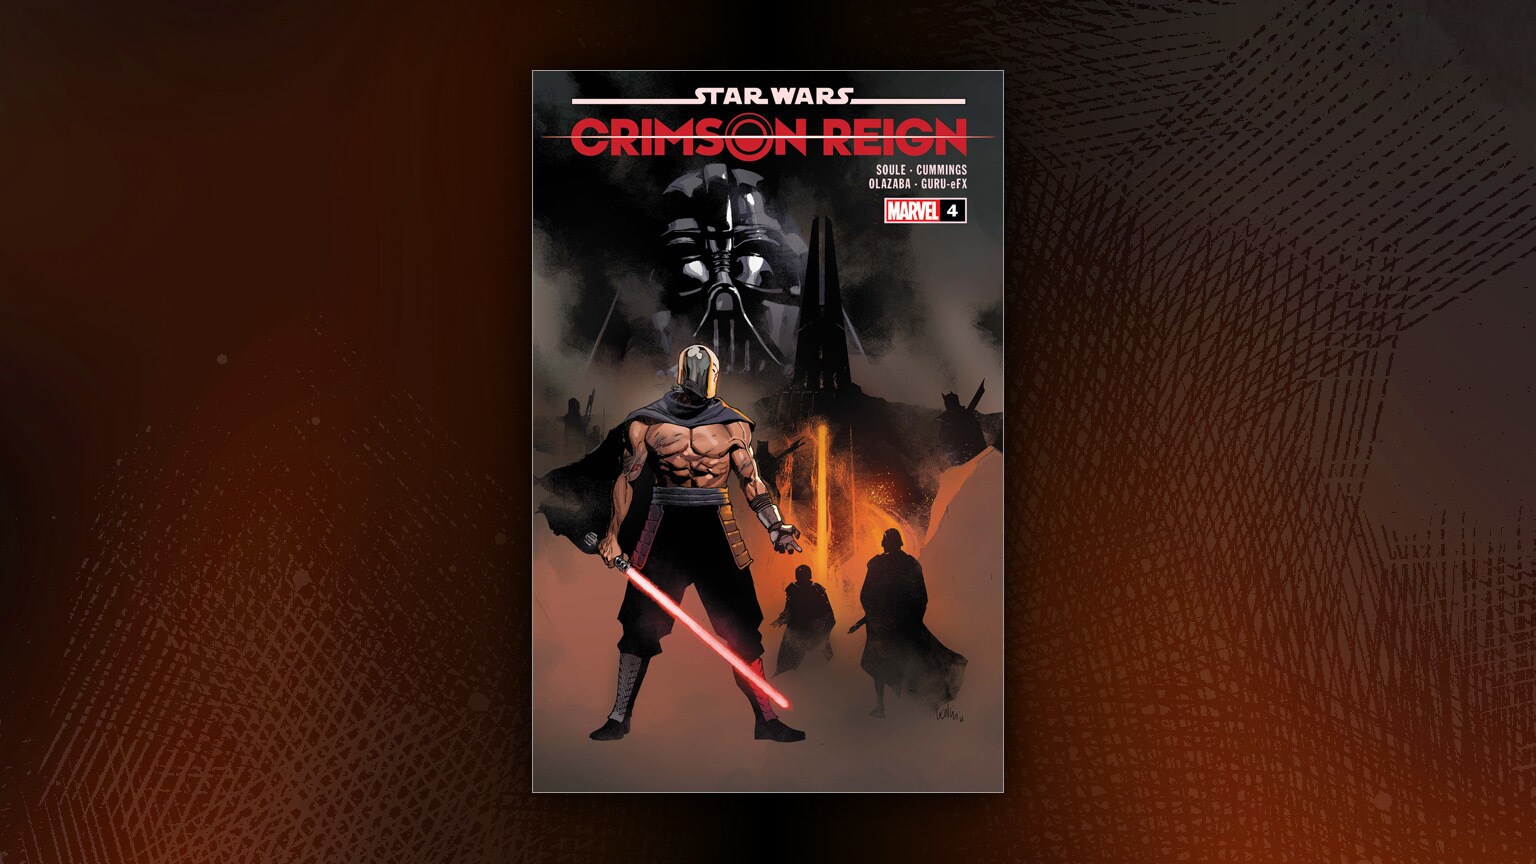 The Knights of Ren Infiltrate Darth Vader’s Castle in Marvel’s Star Wars: Crimson Reign #4 - Exclusive Preview